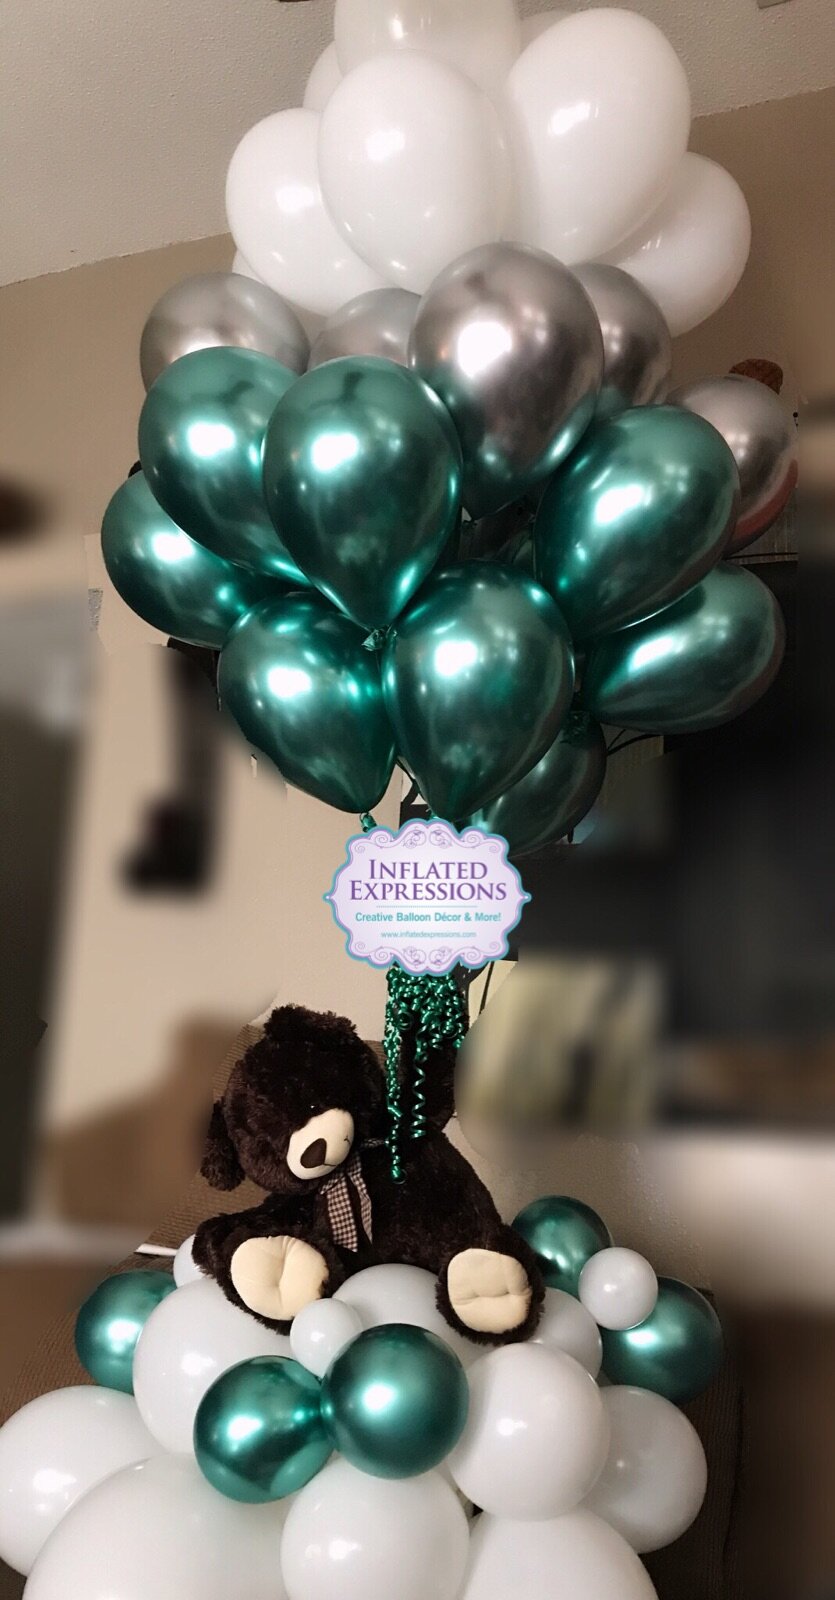 teddy in a balloon gift